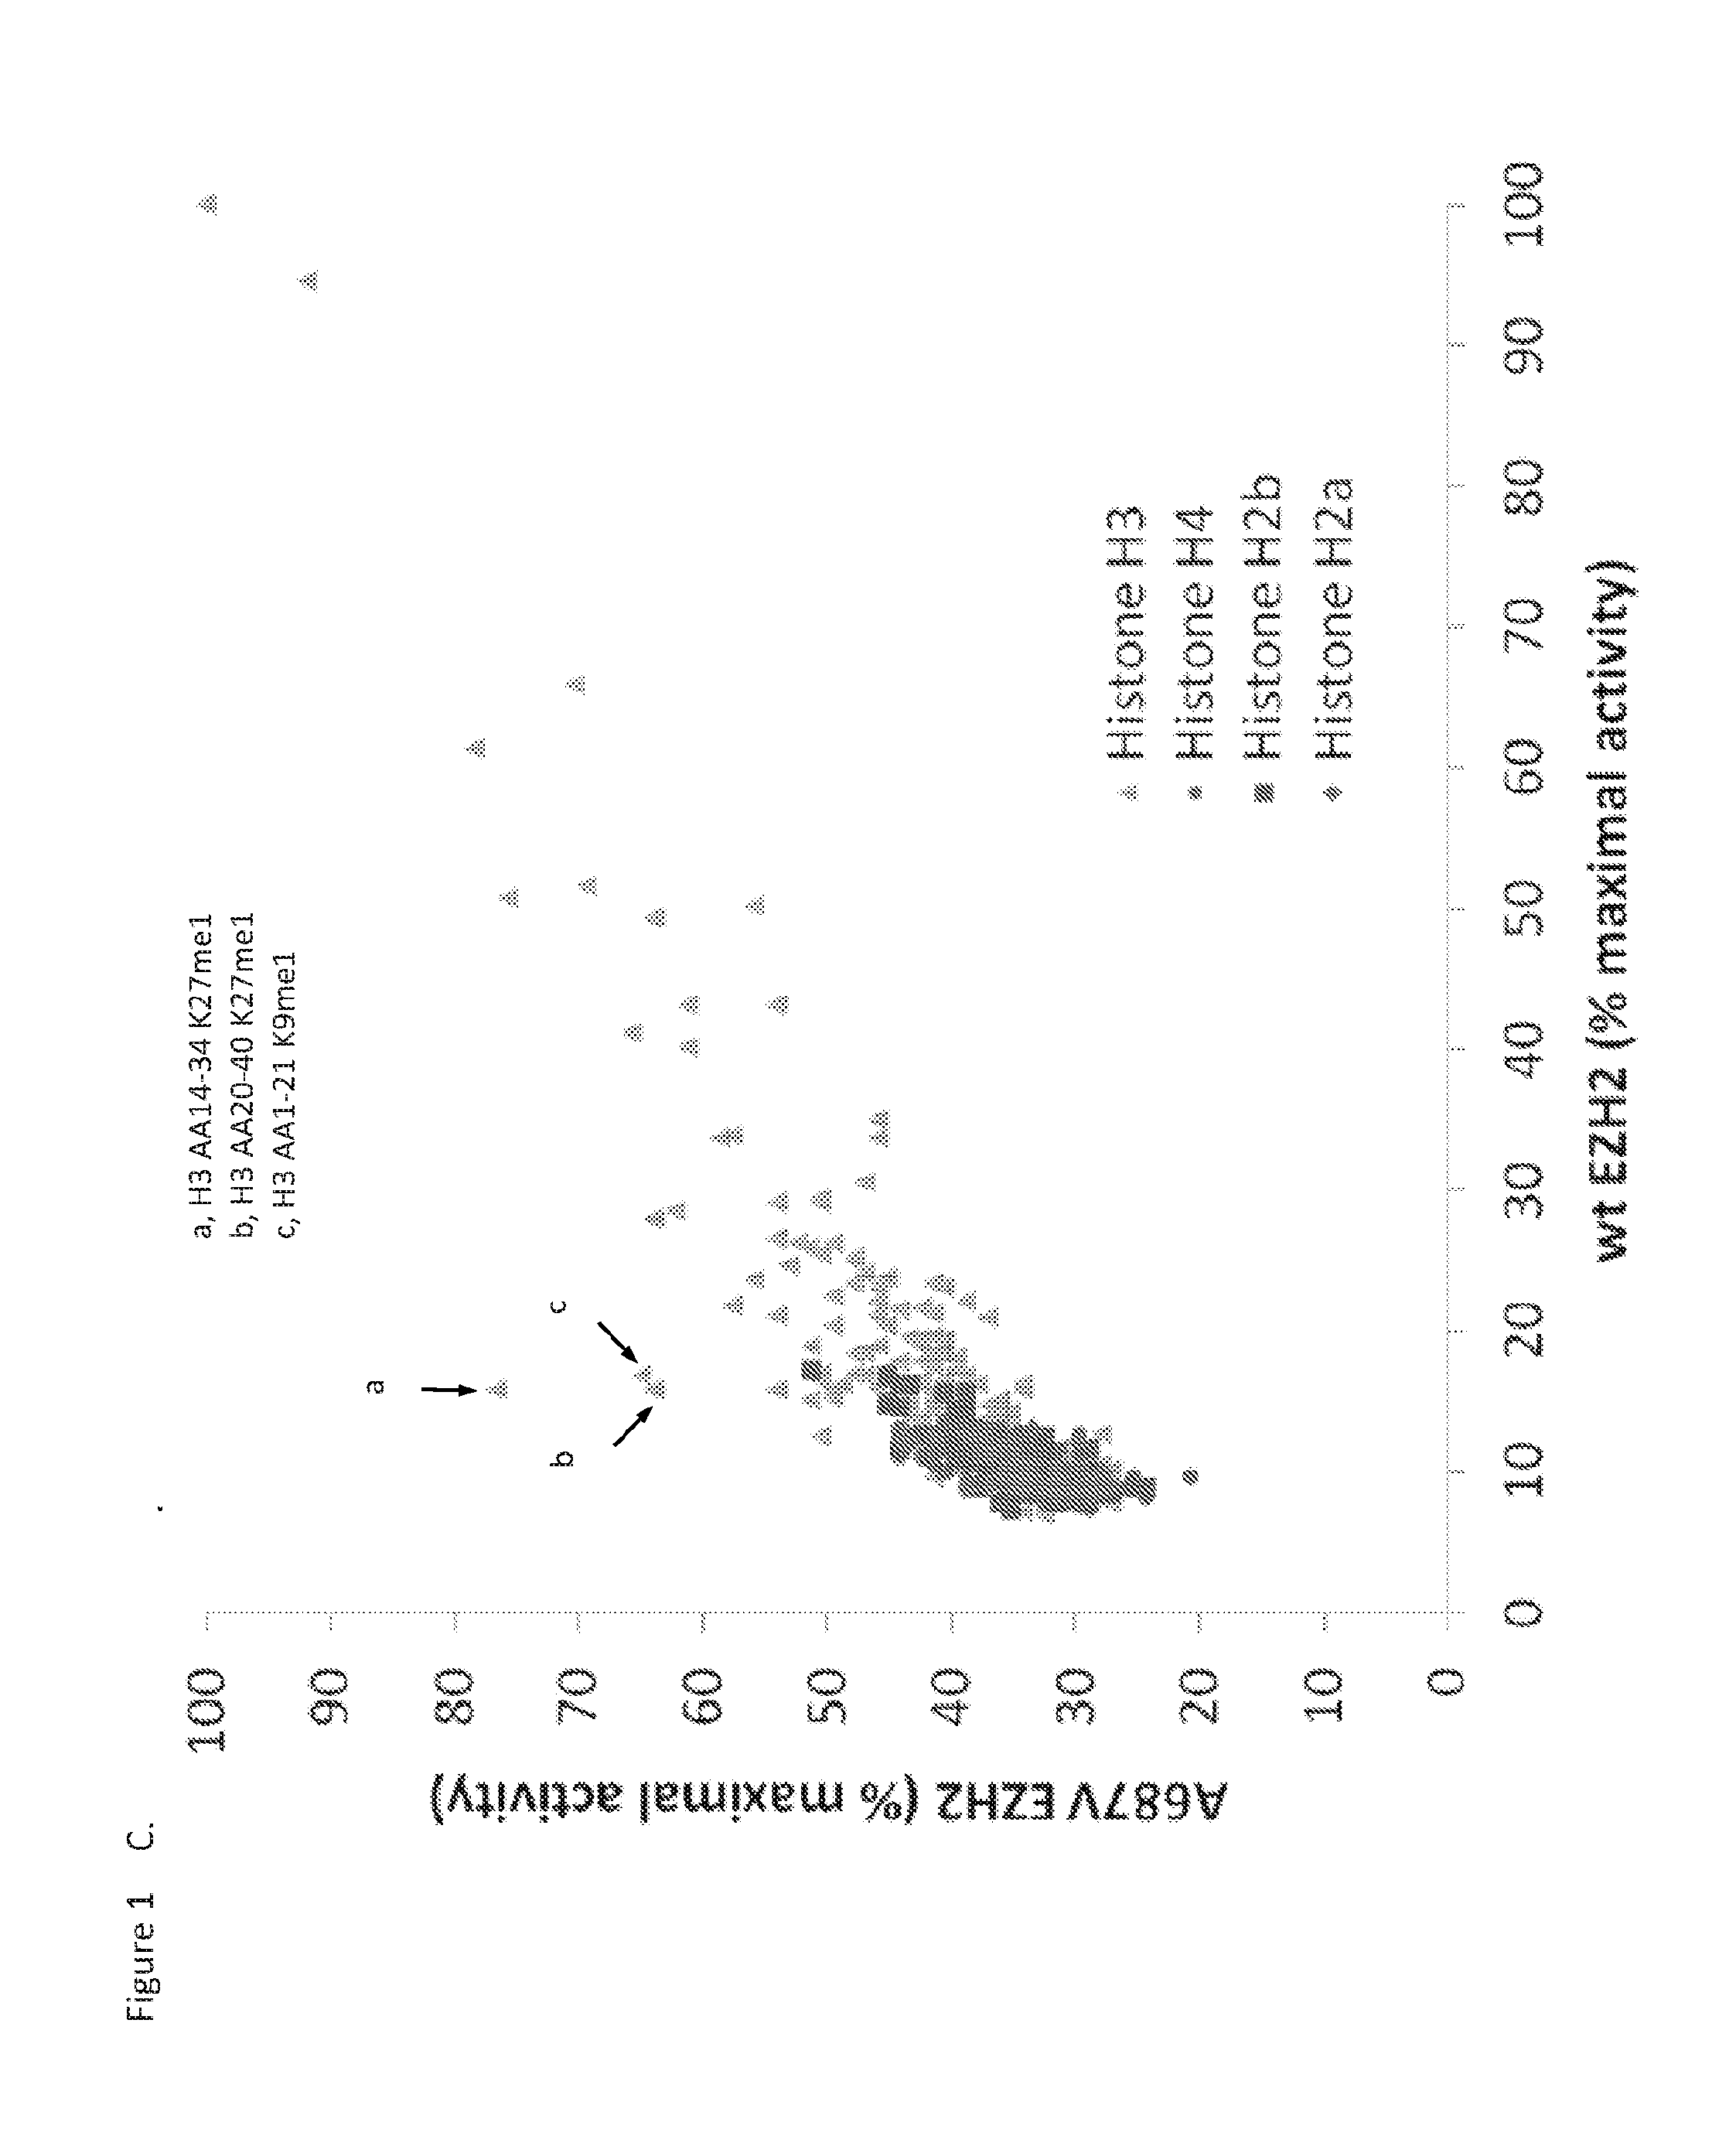 Methods of treating cancer patients responding to ezh2 inhibitor gsk126